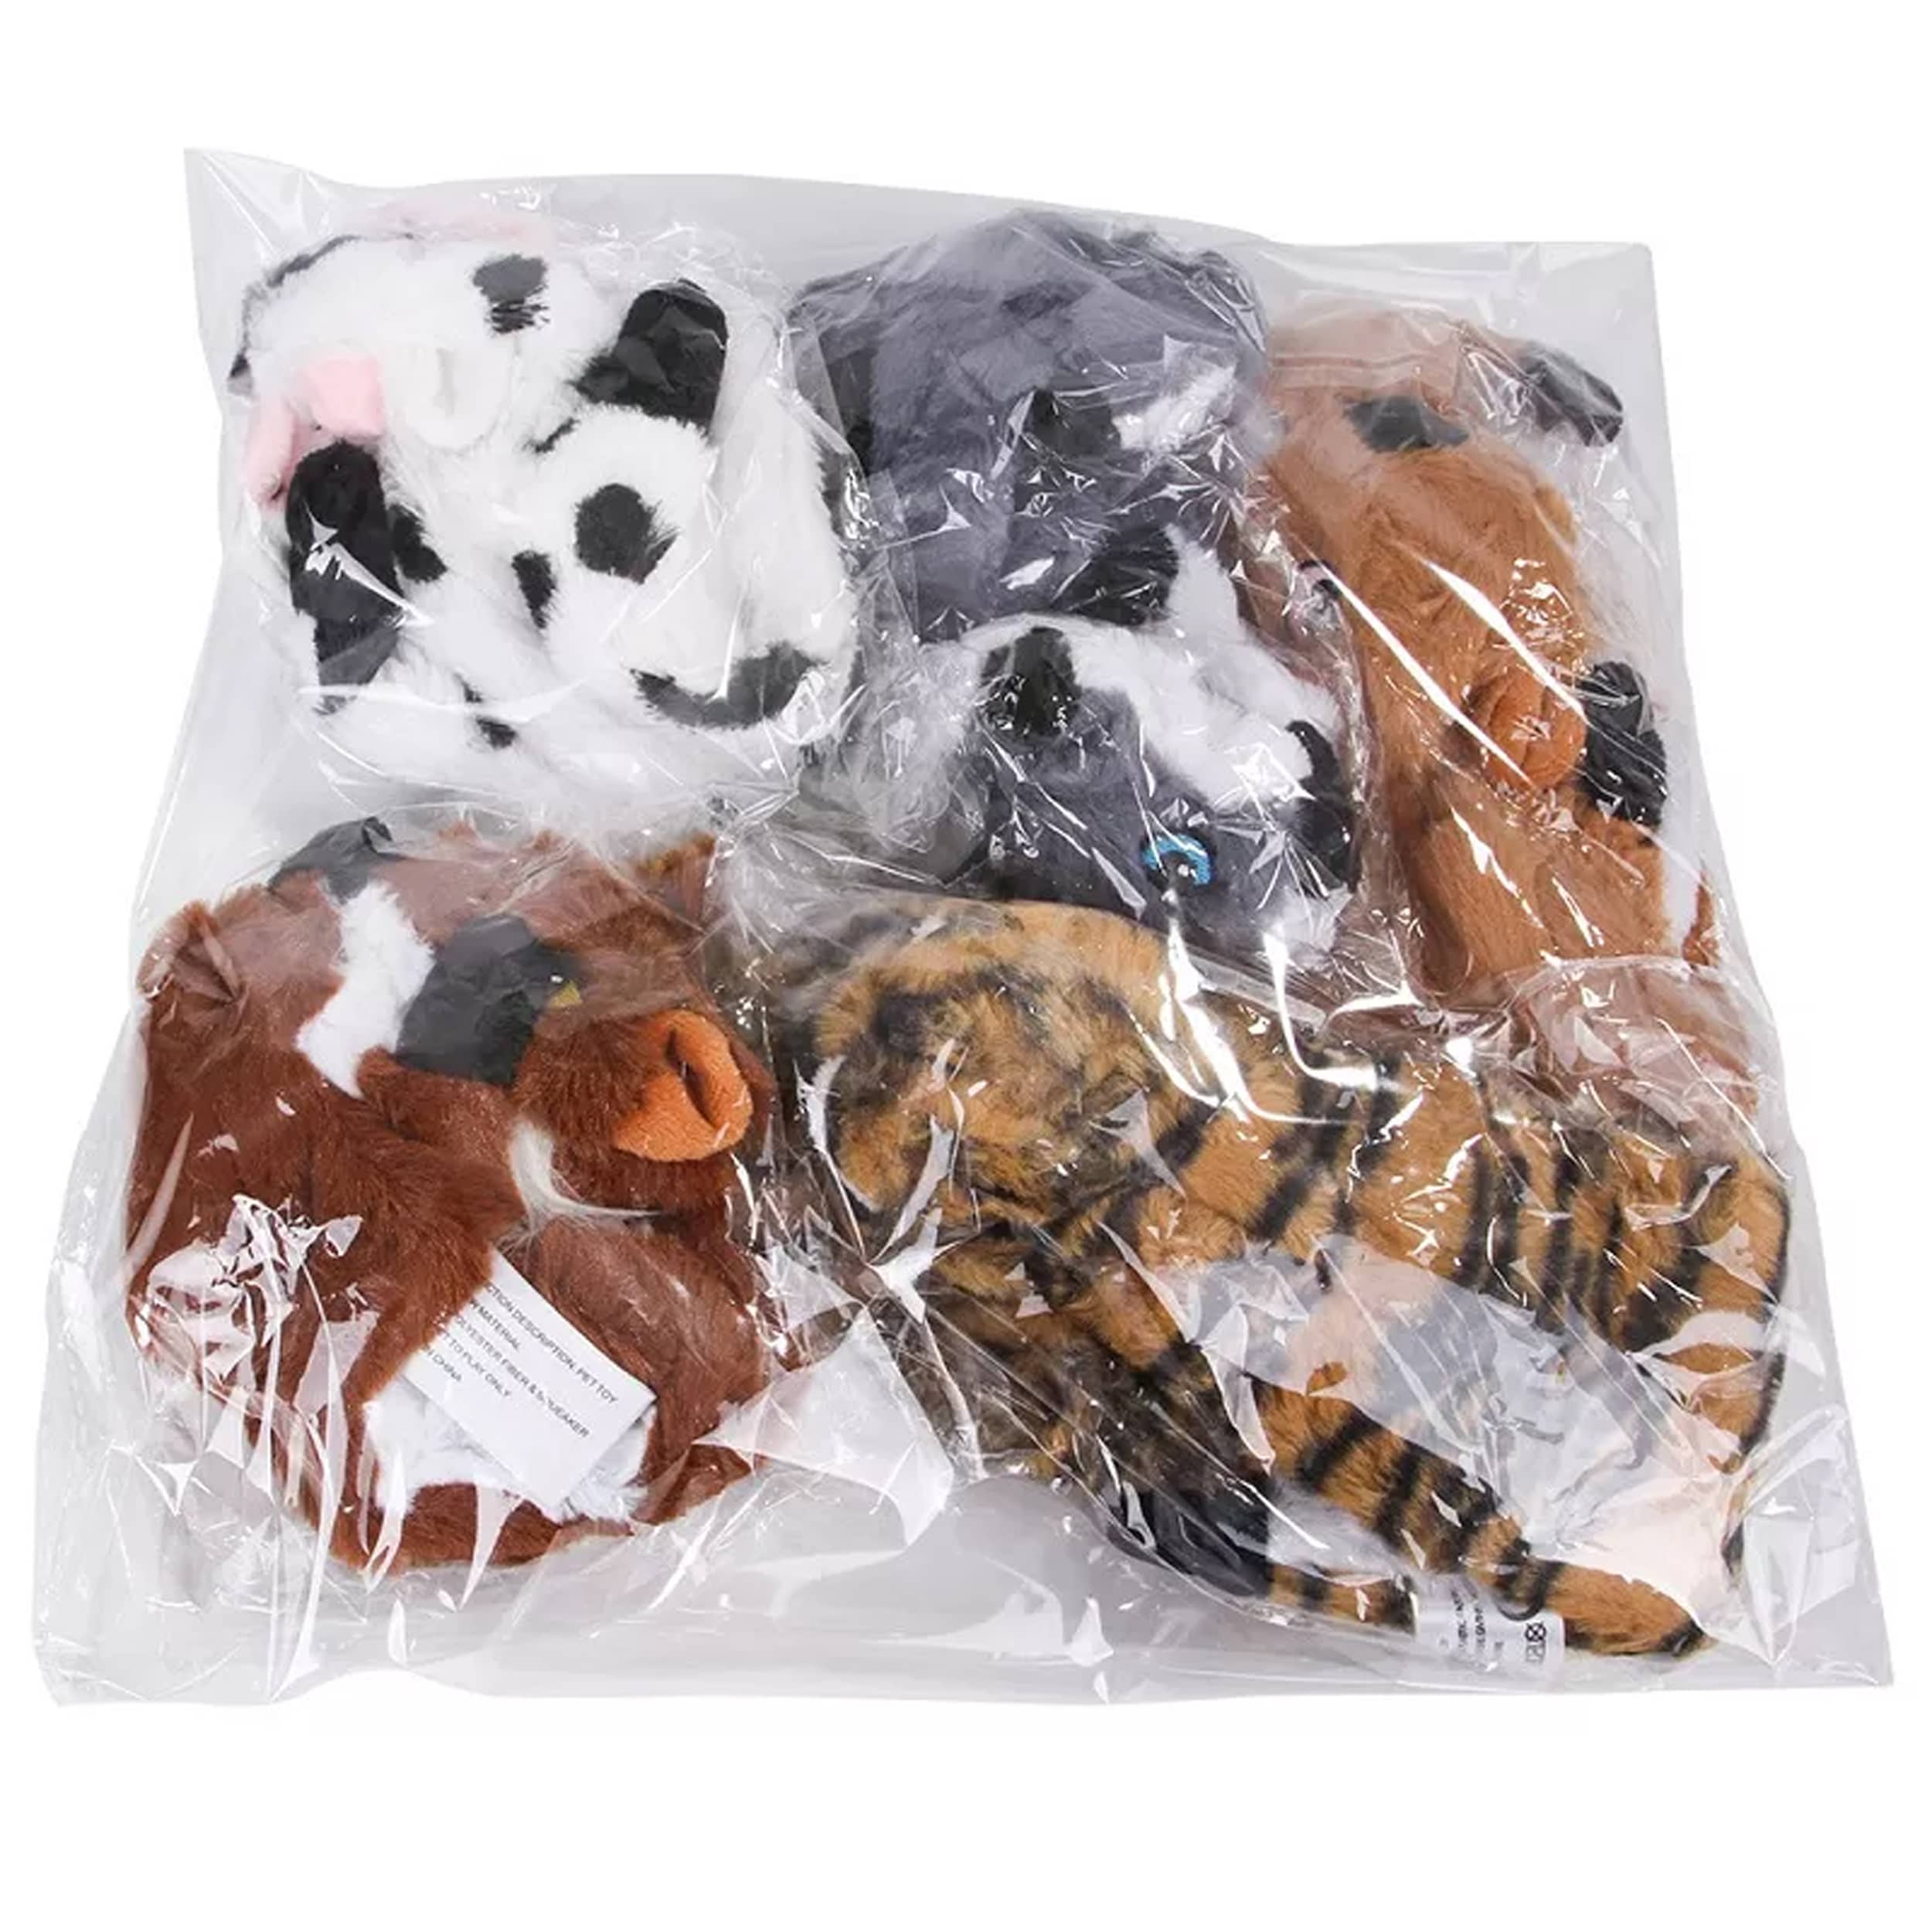 Animals Plush Dog Chew Toys With No Stuffing packing image